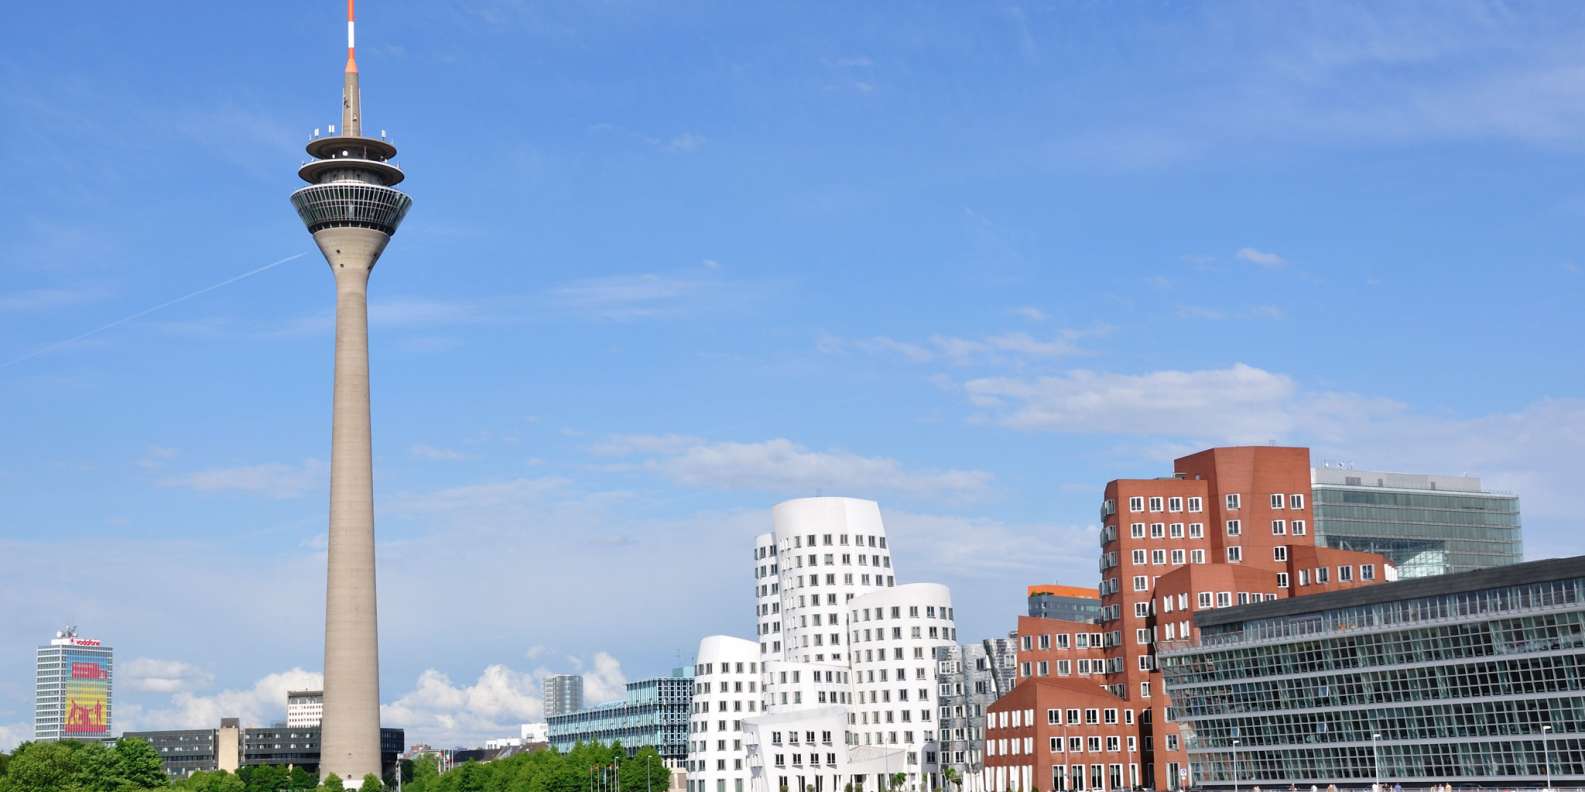 The BEST Düsseldorf Good for groups 2023 FREE Cancellation GetYourGuide